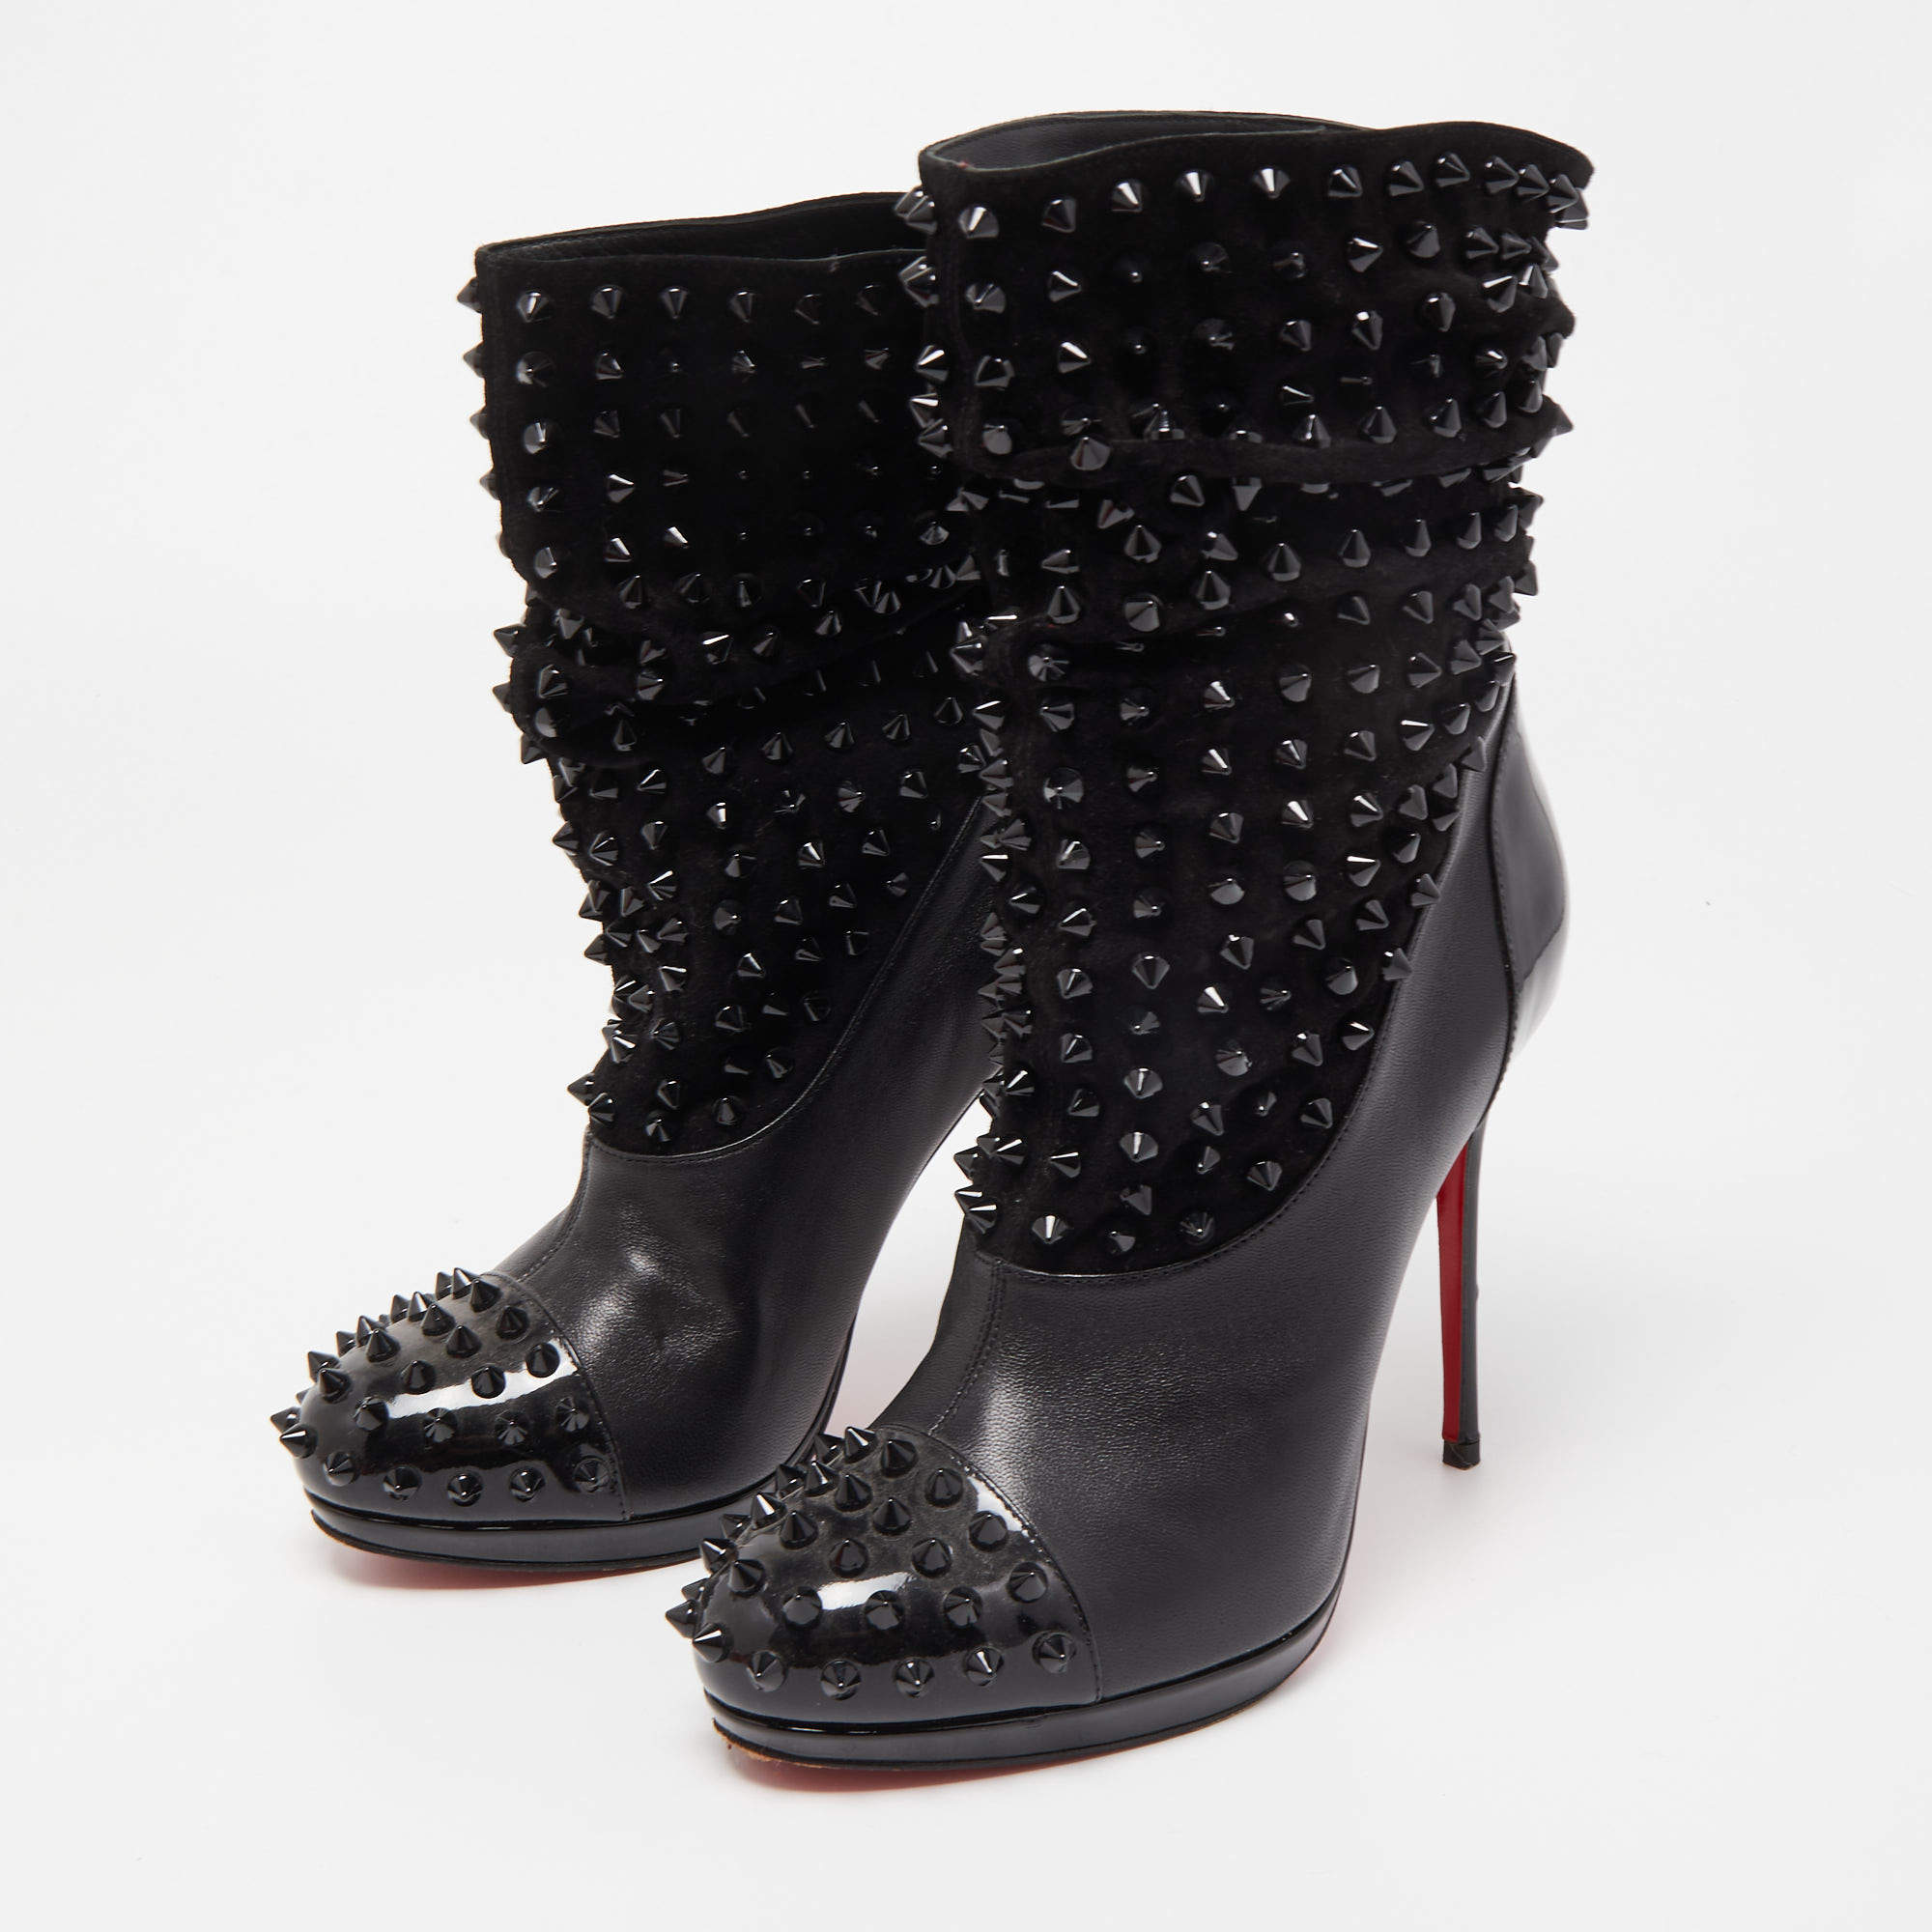 Christian Louboutin Black Patent Leather and Suede Spike Wars